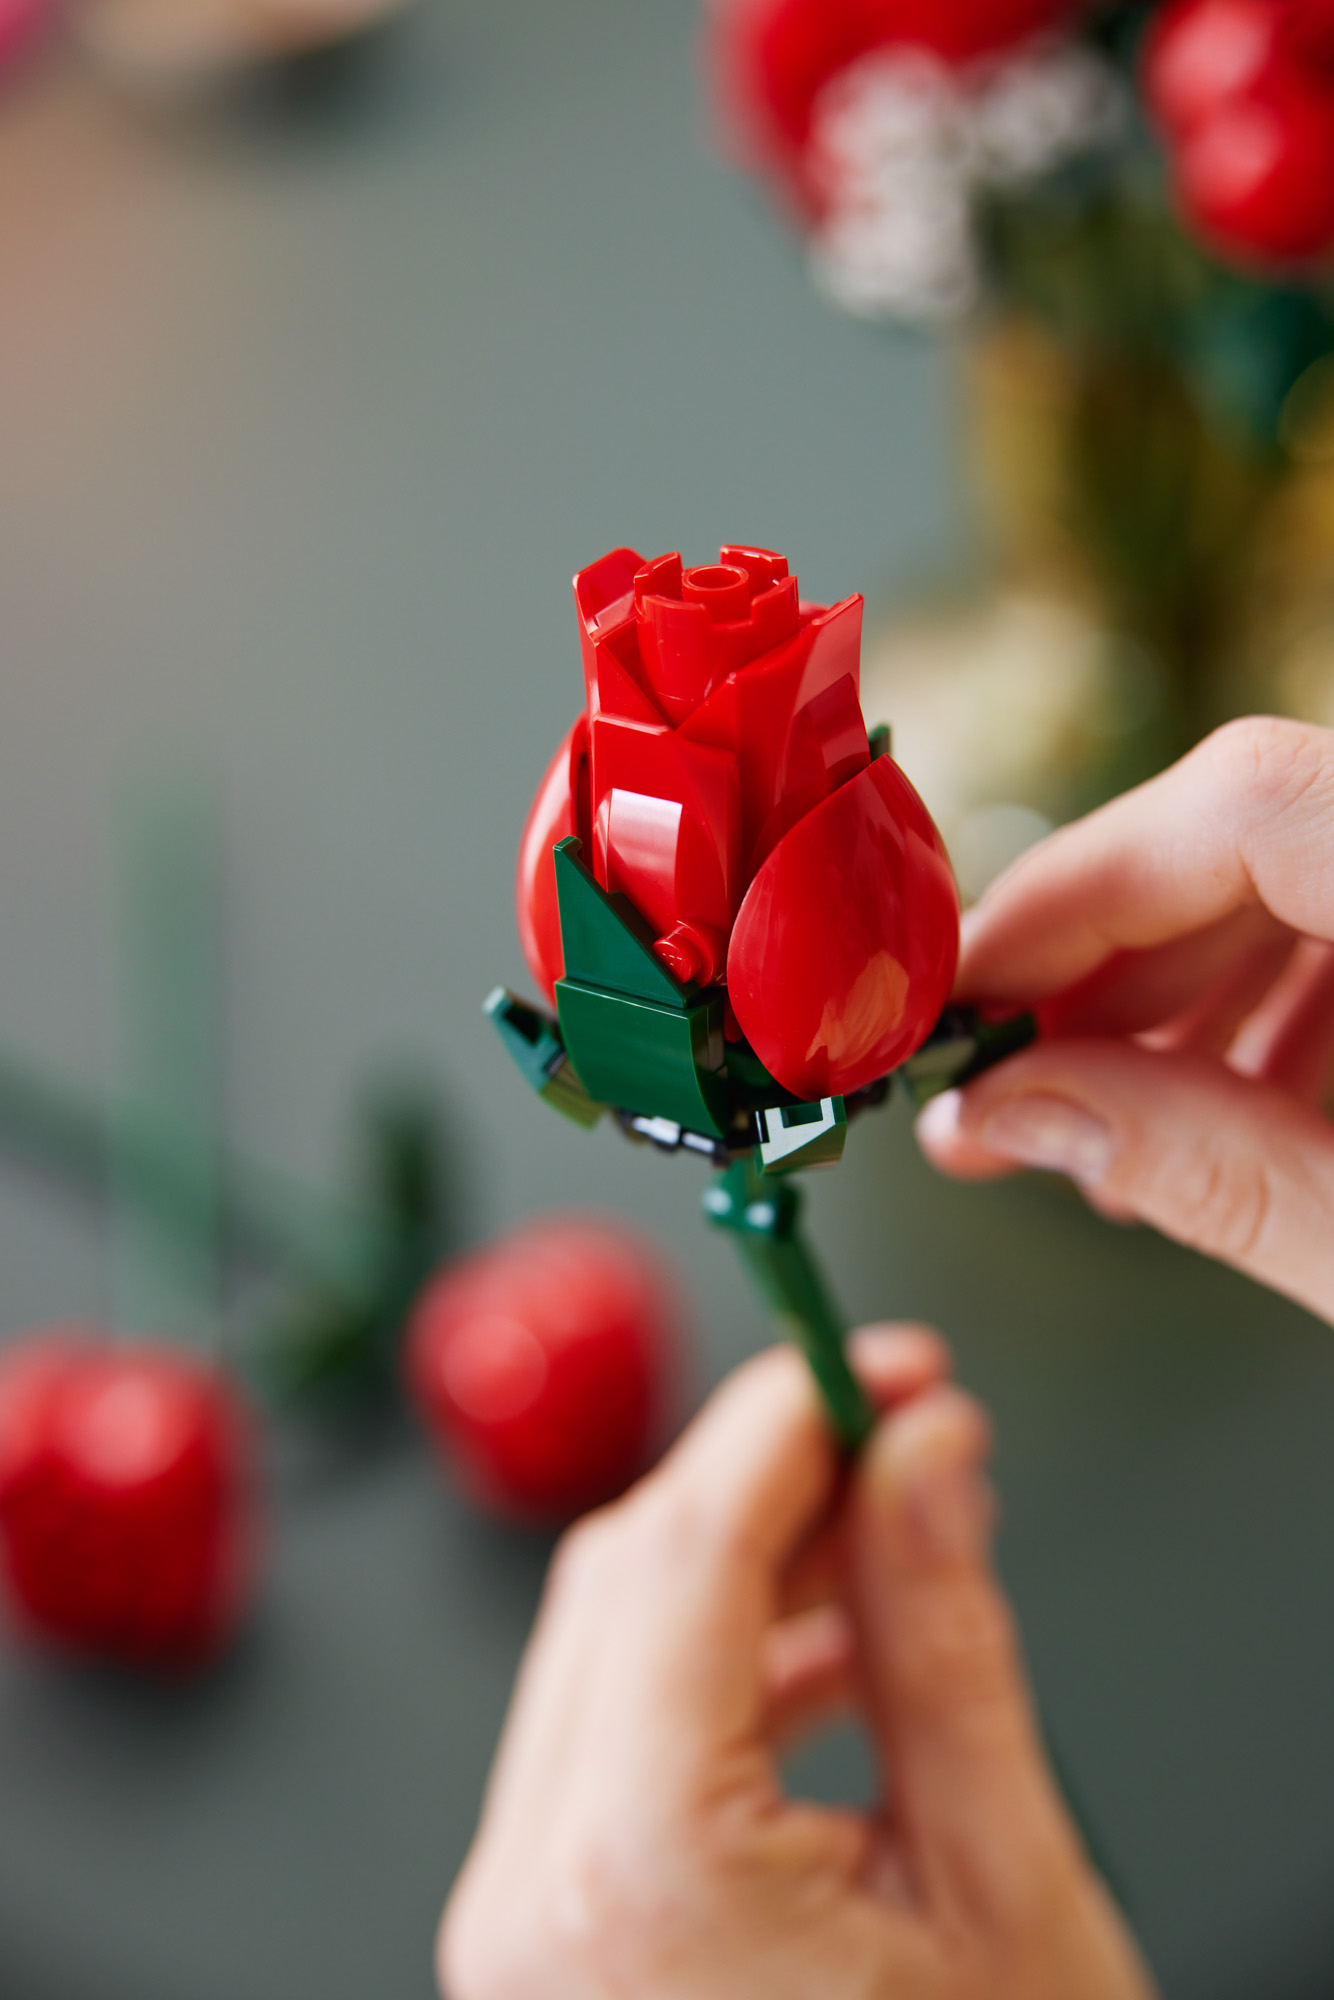 LEGO Icons Botanical Collection Bouquet of Roses (10328) Officially  Announced! – The Brick Post!